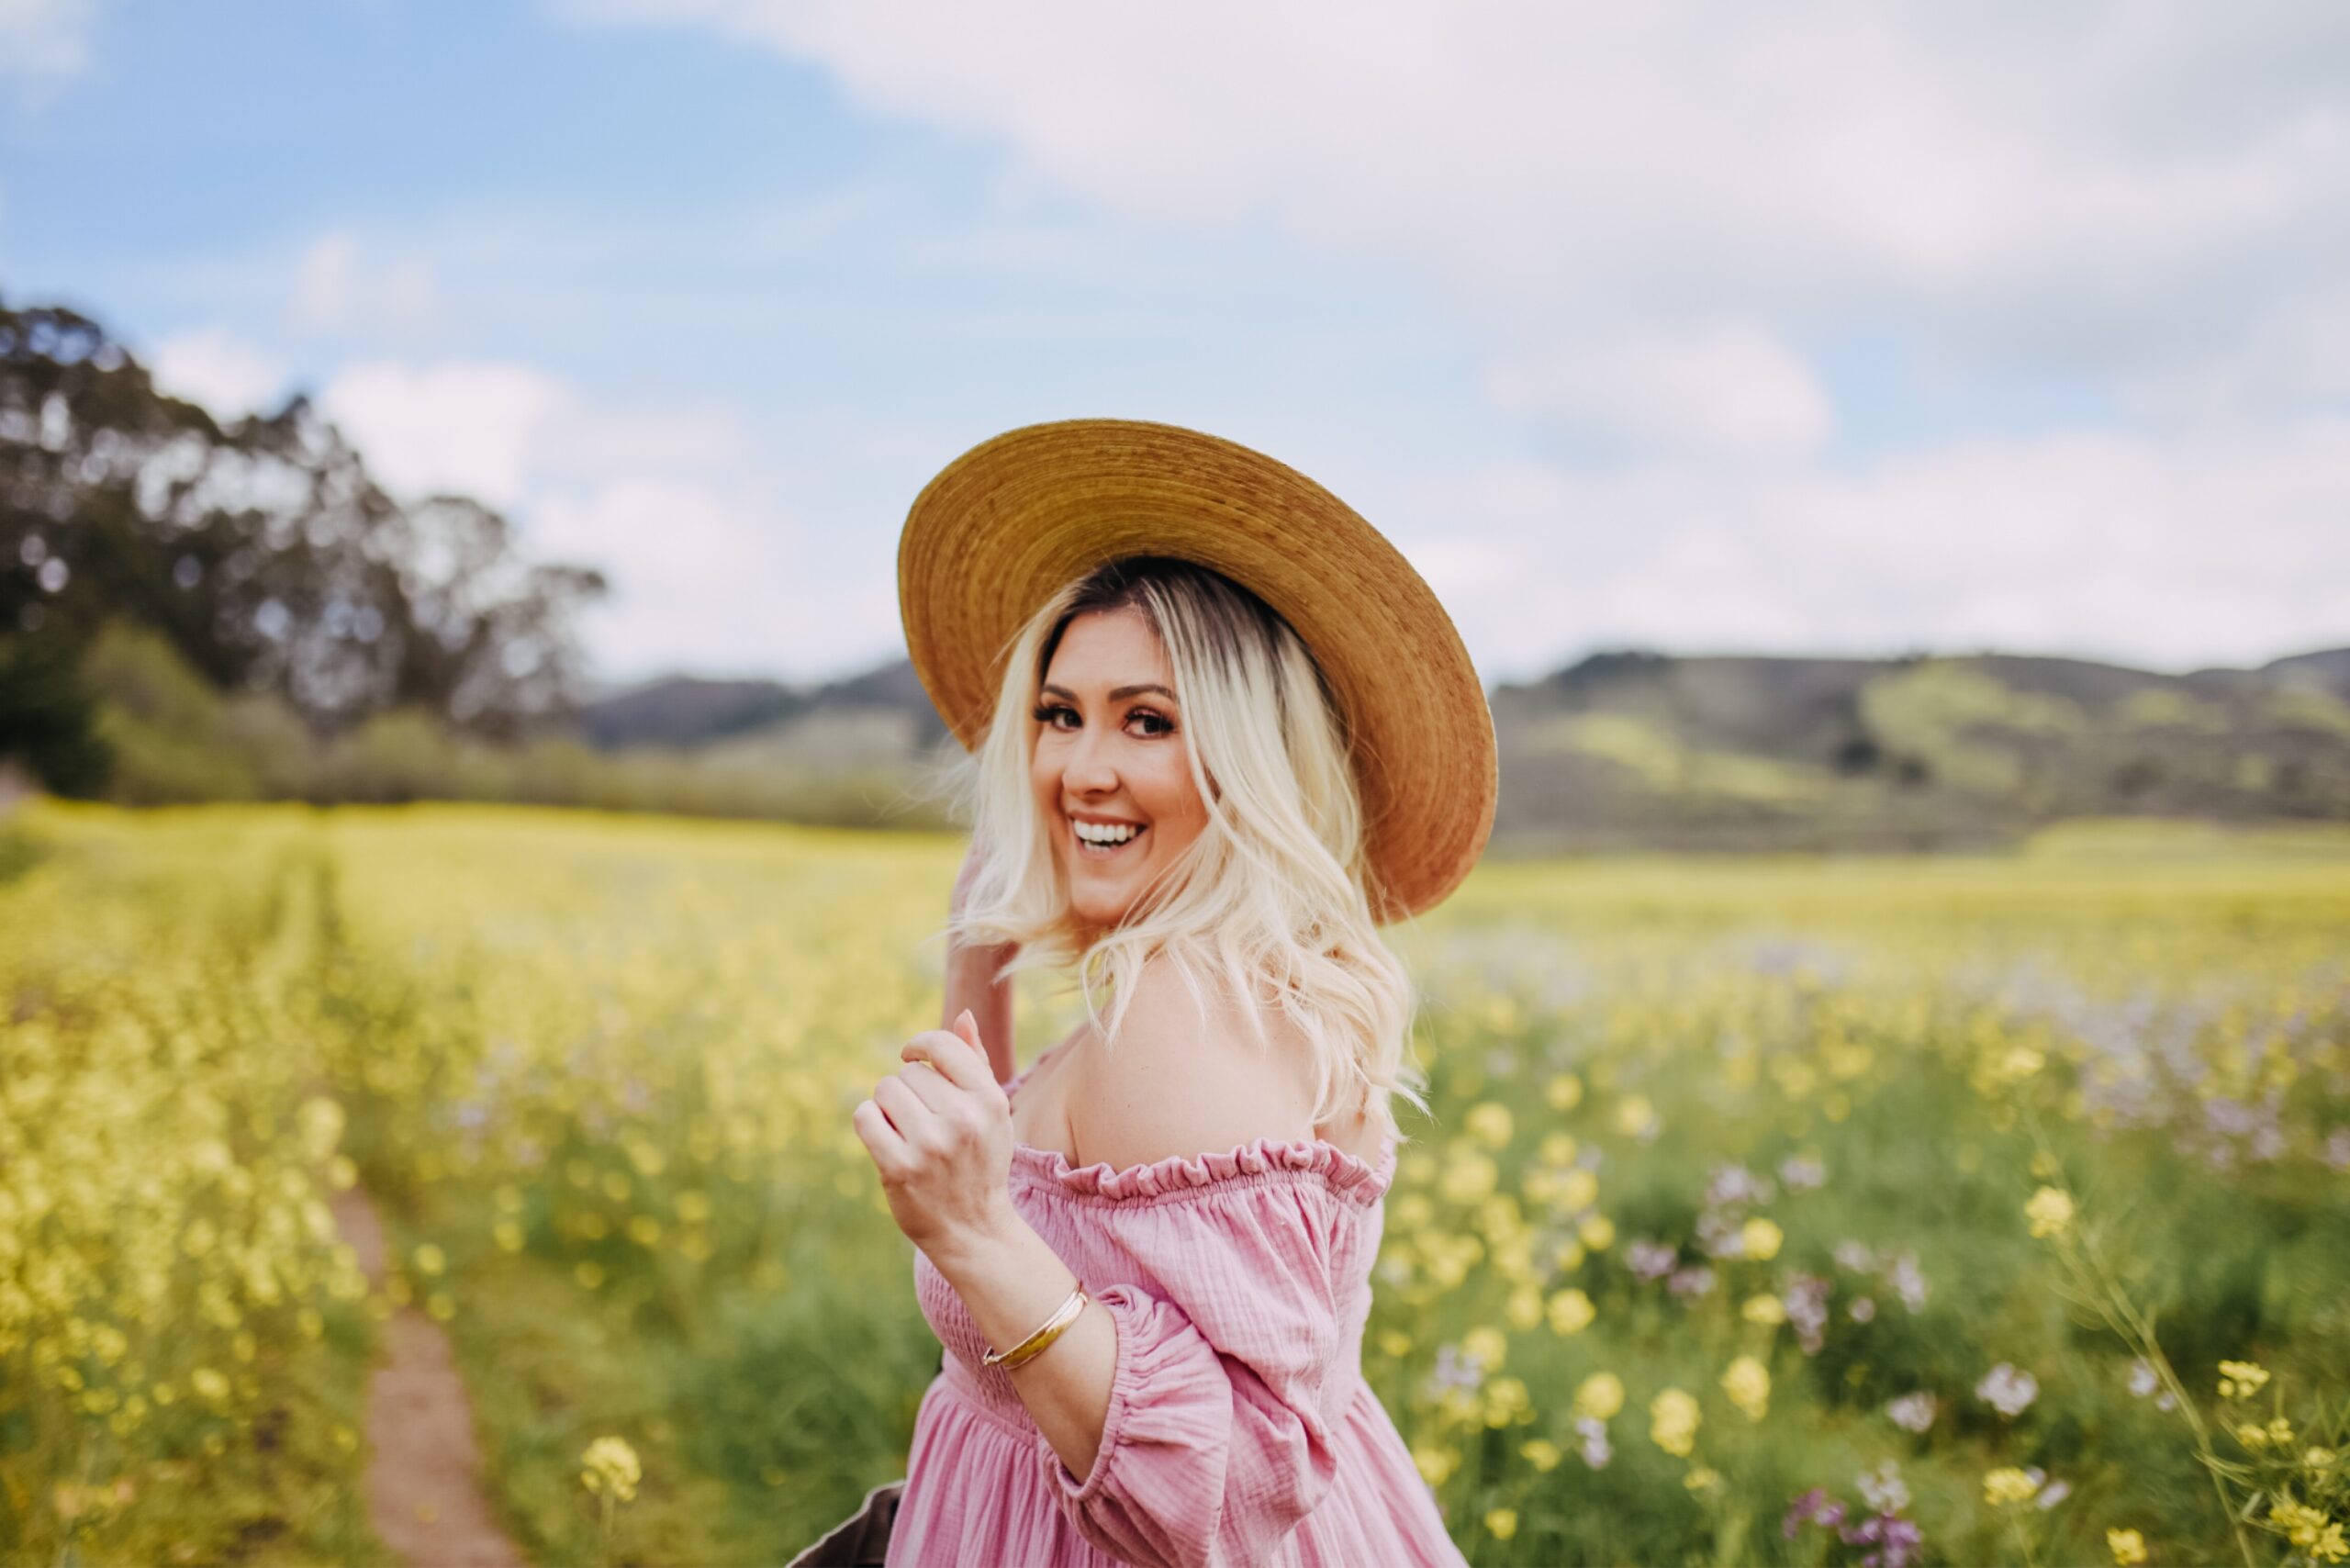 Nap Dress Review, How to Find the Half Moon Bay Superbloom, Superbloom Directions, half moon bay mustard flower field, KatWalkSF wearing a nap dress